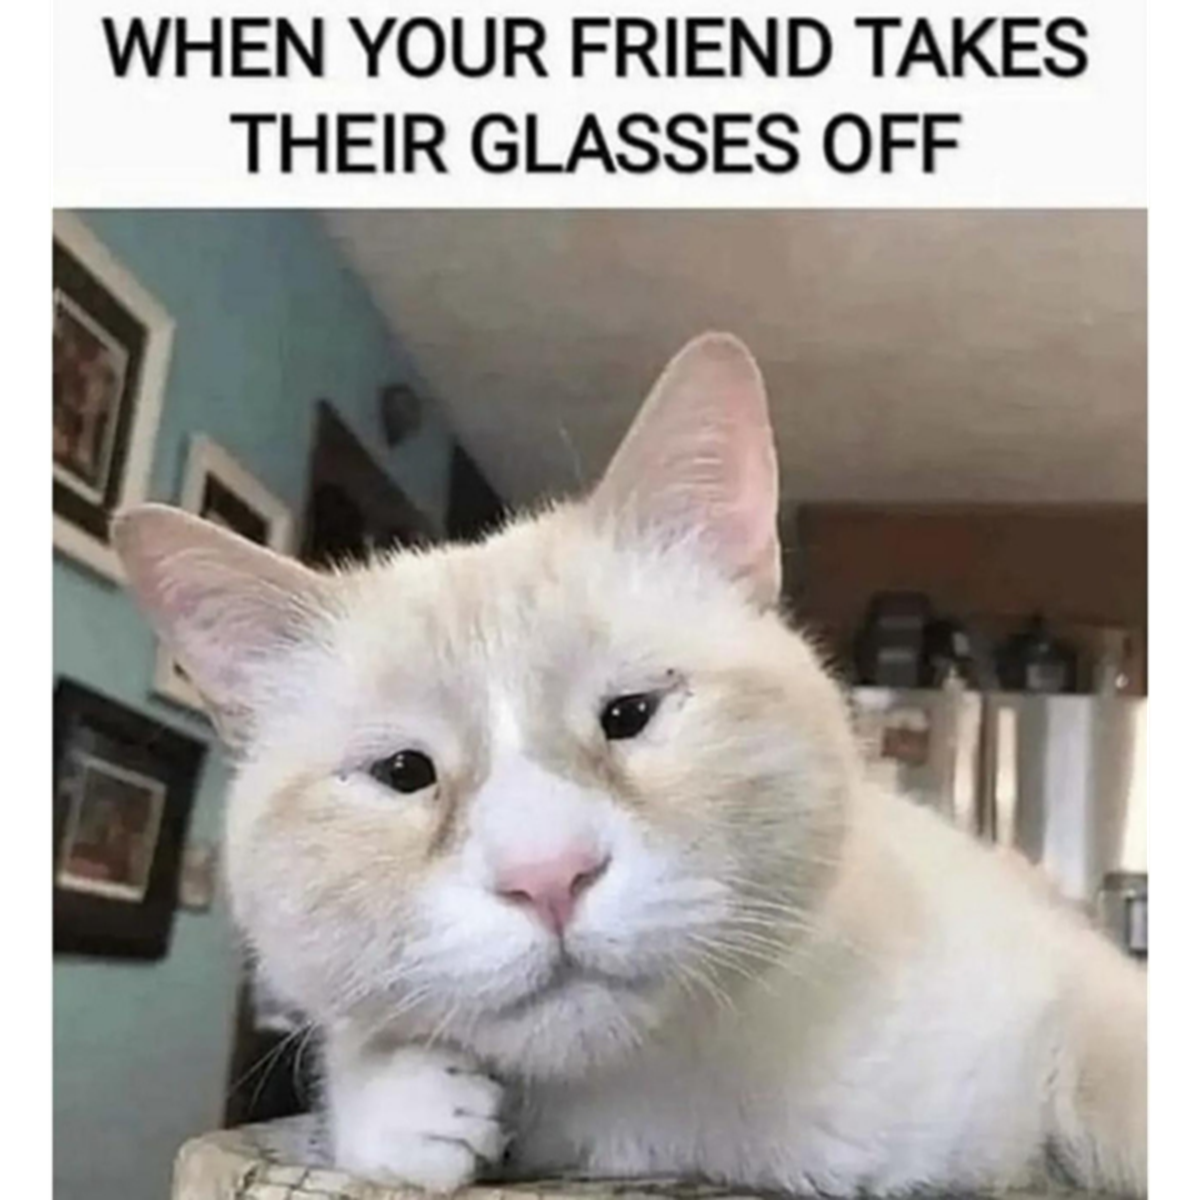 cat takes off glasses - When Your Friend Takes Their Glasses Off